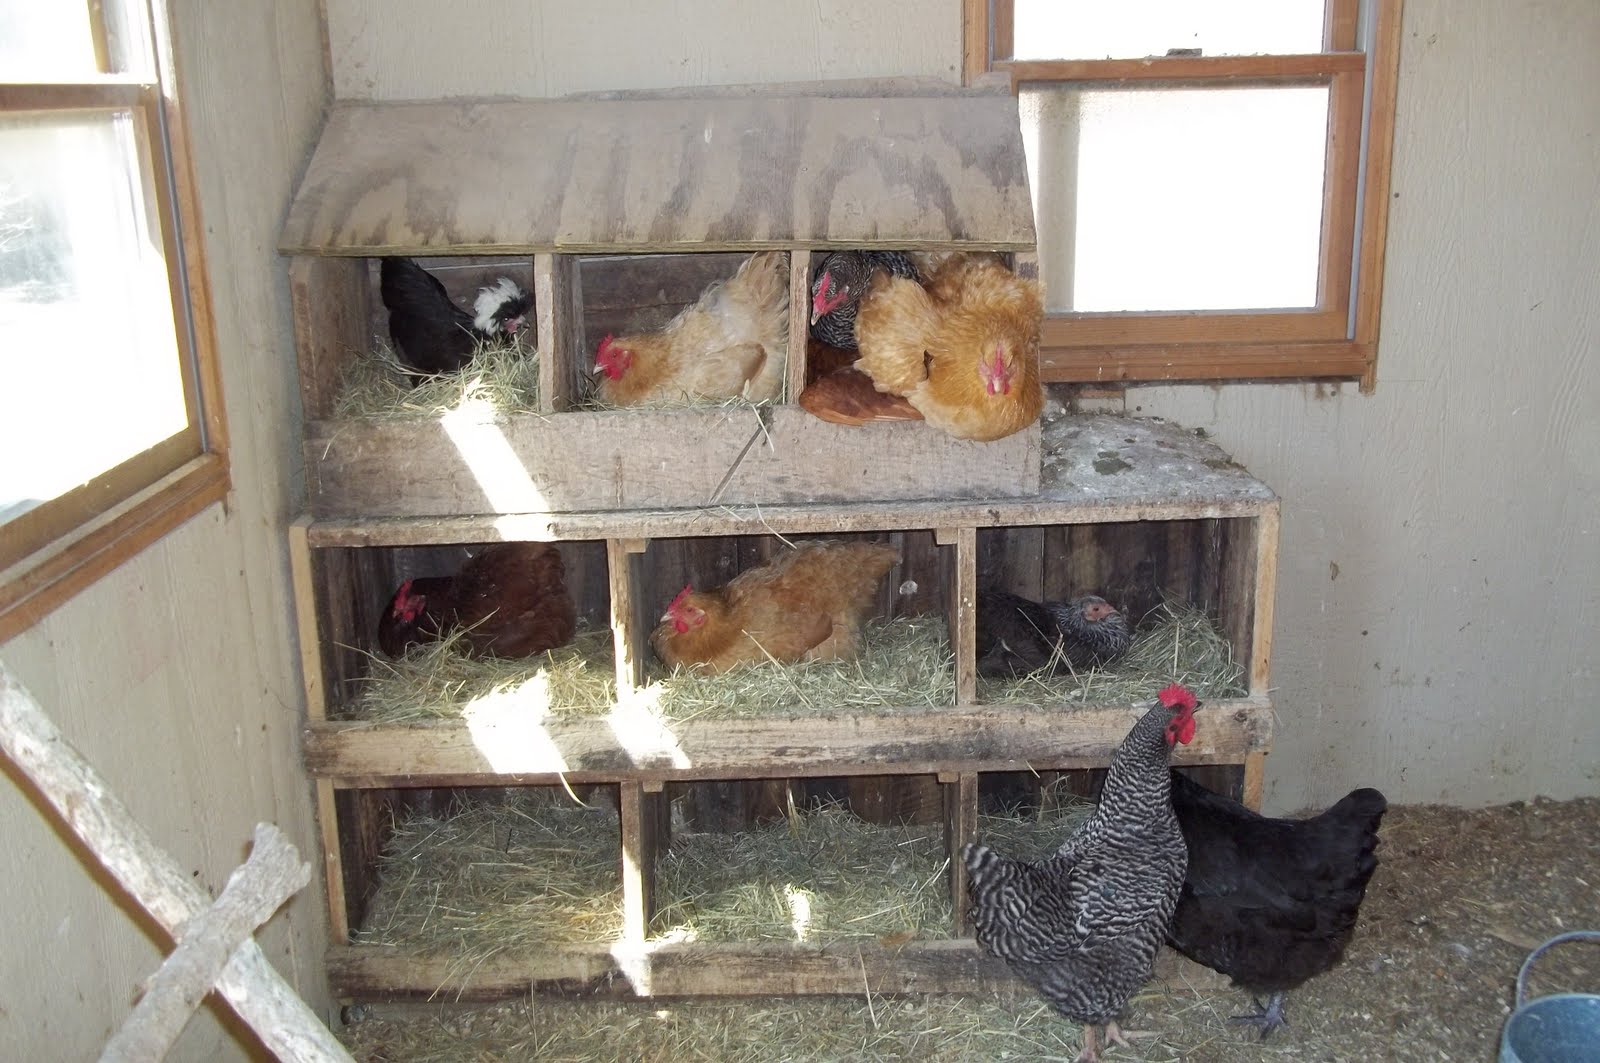 See these nice nesting boxes our hens have? Spacious and full of clean 